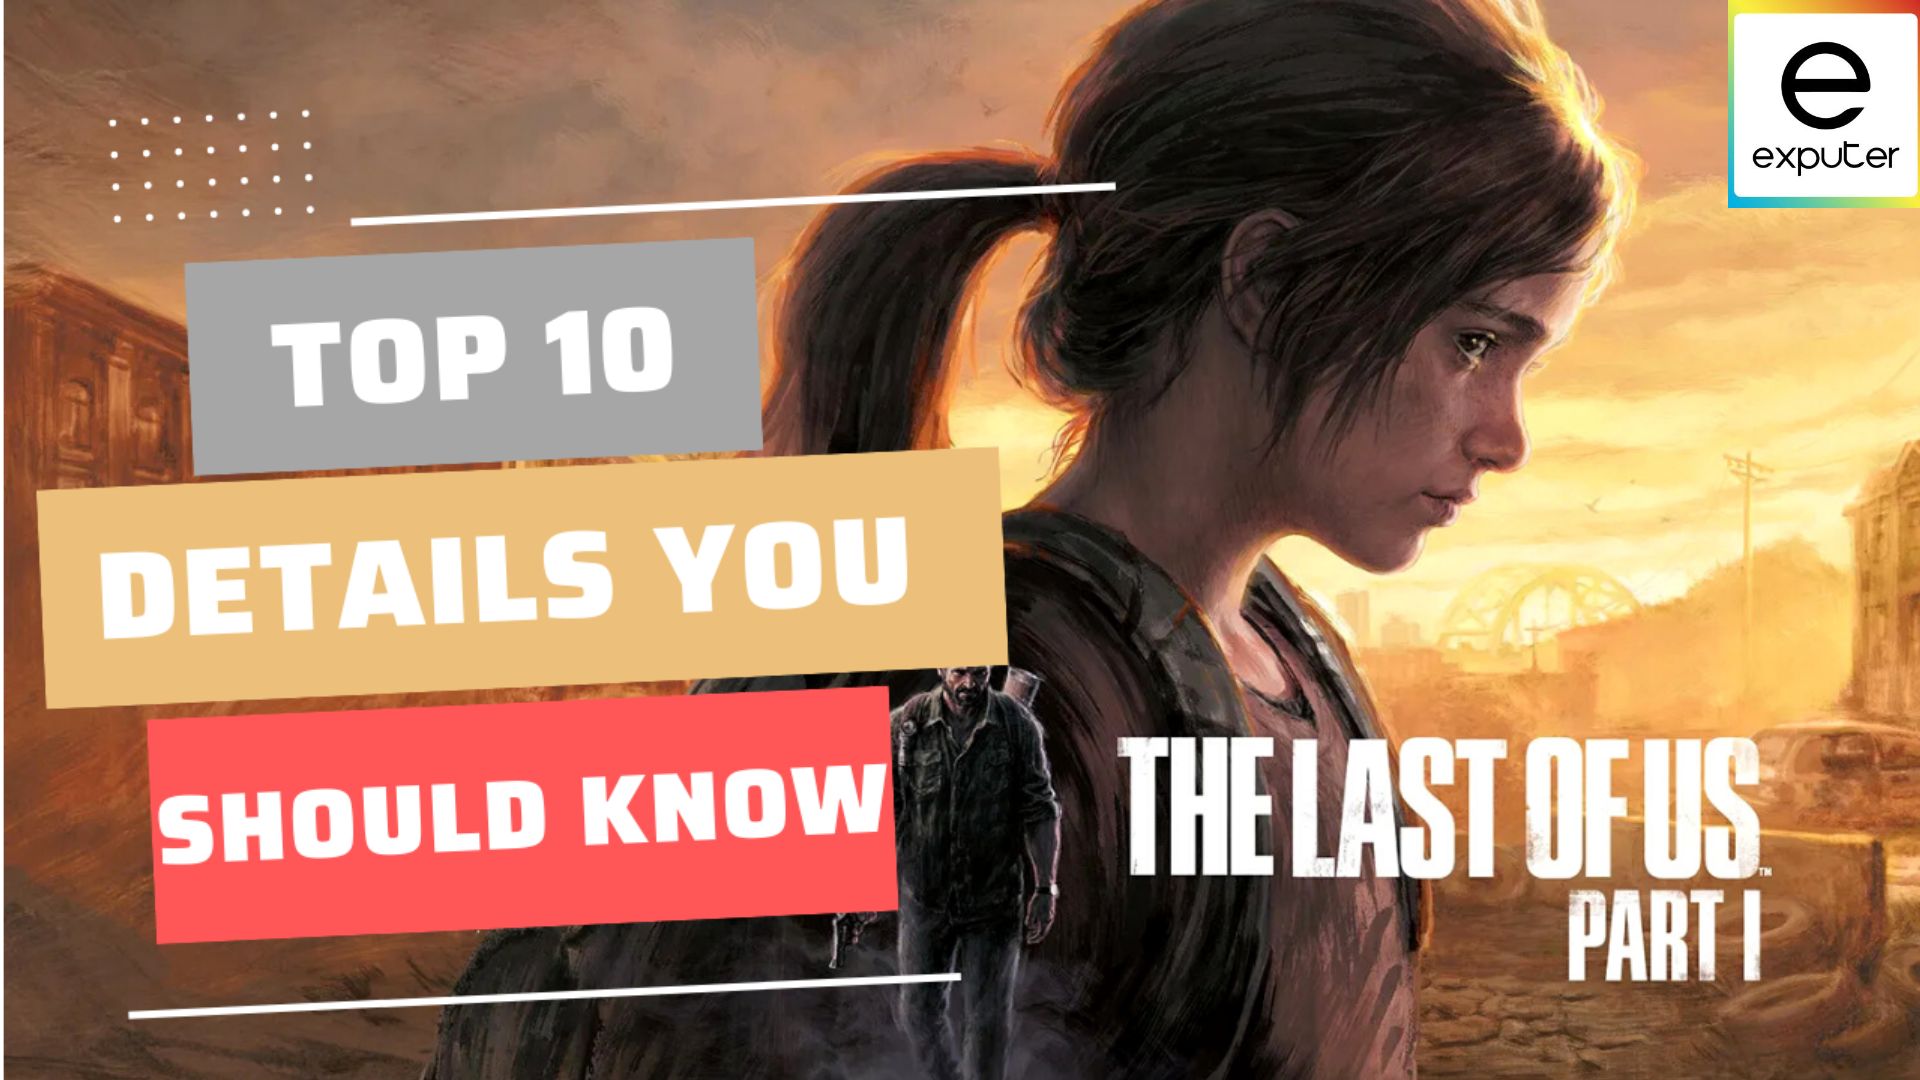 The Last Of Us Remake Is Extremely Detailed, But Does It Matter?